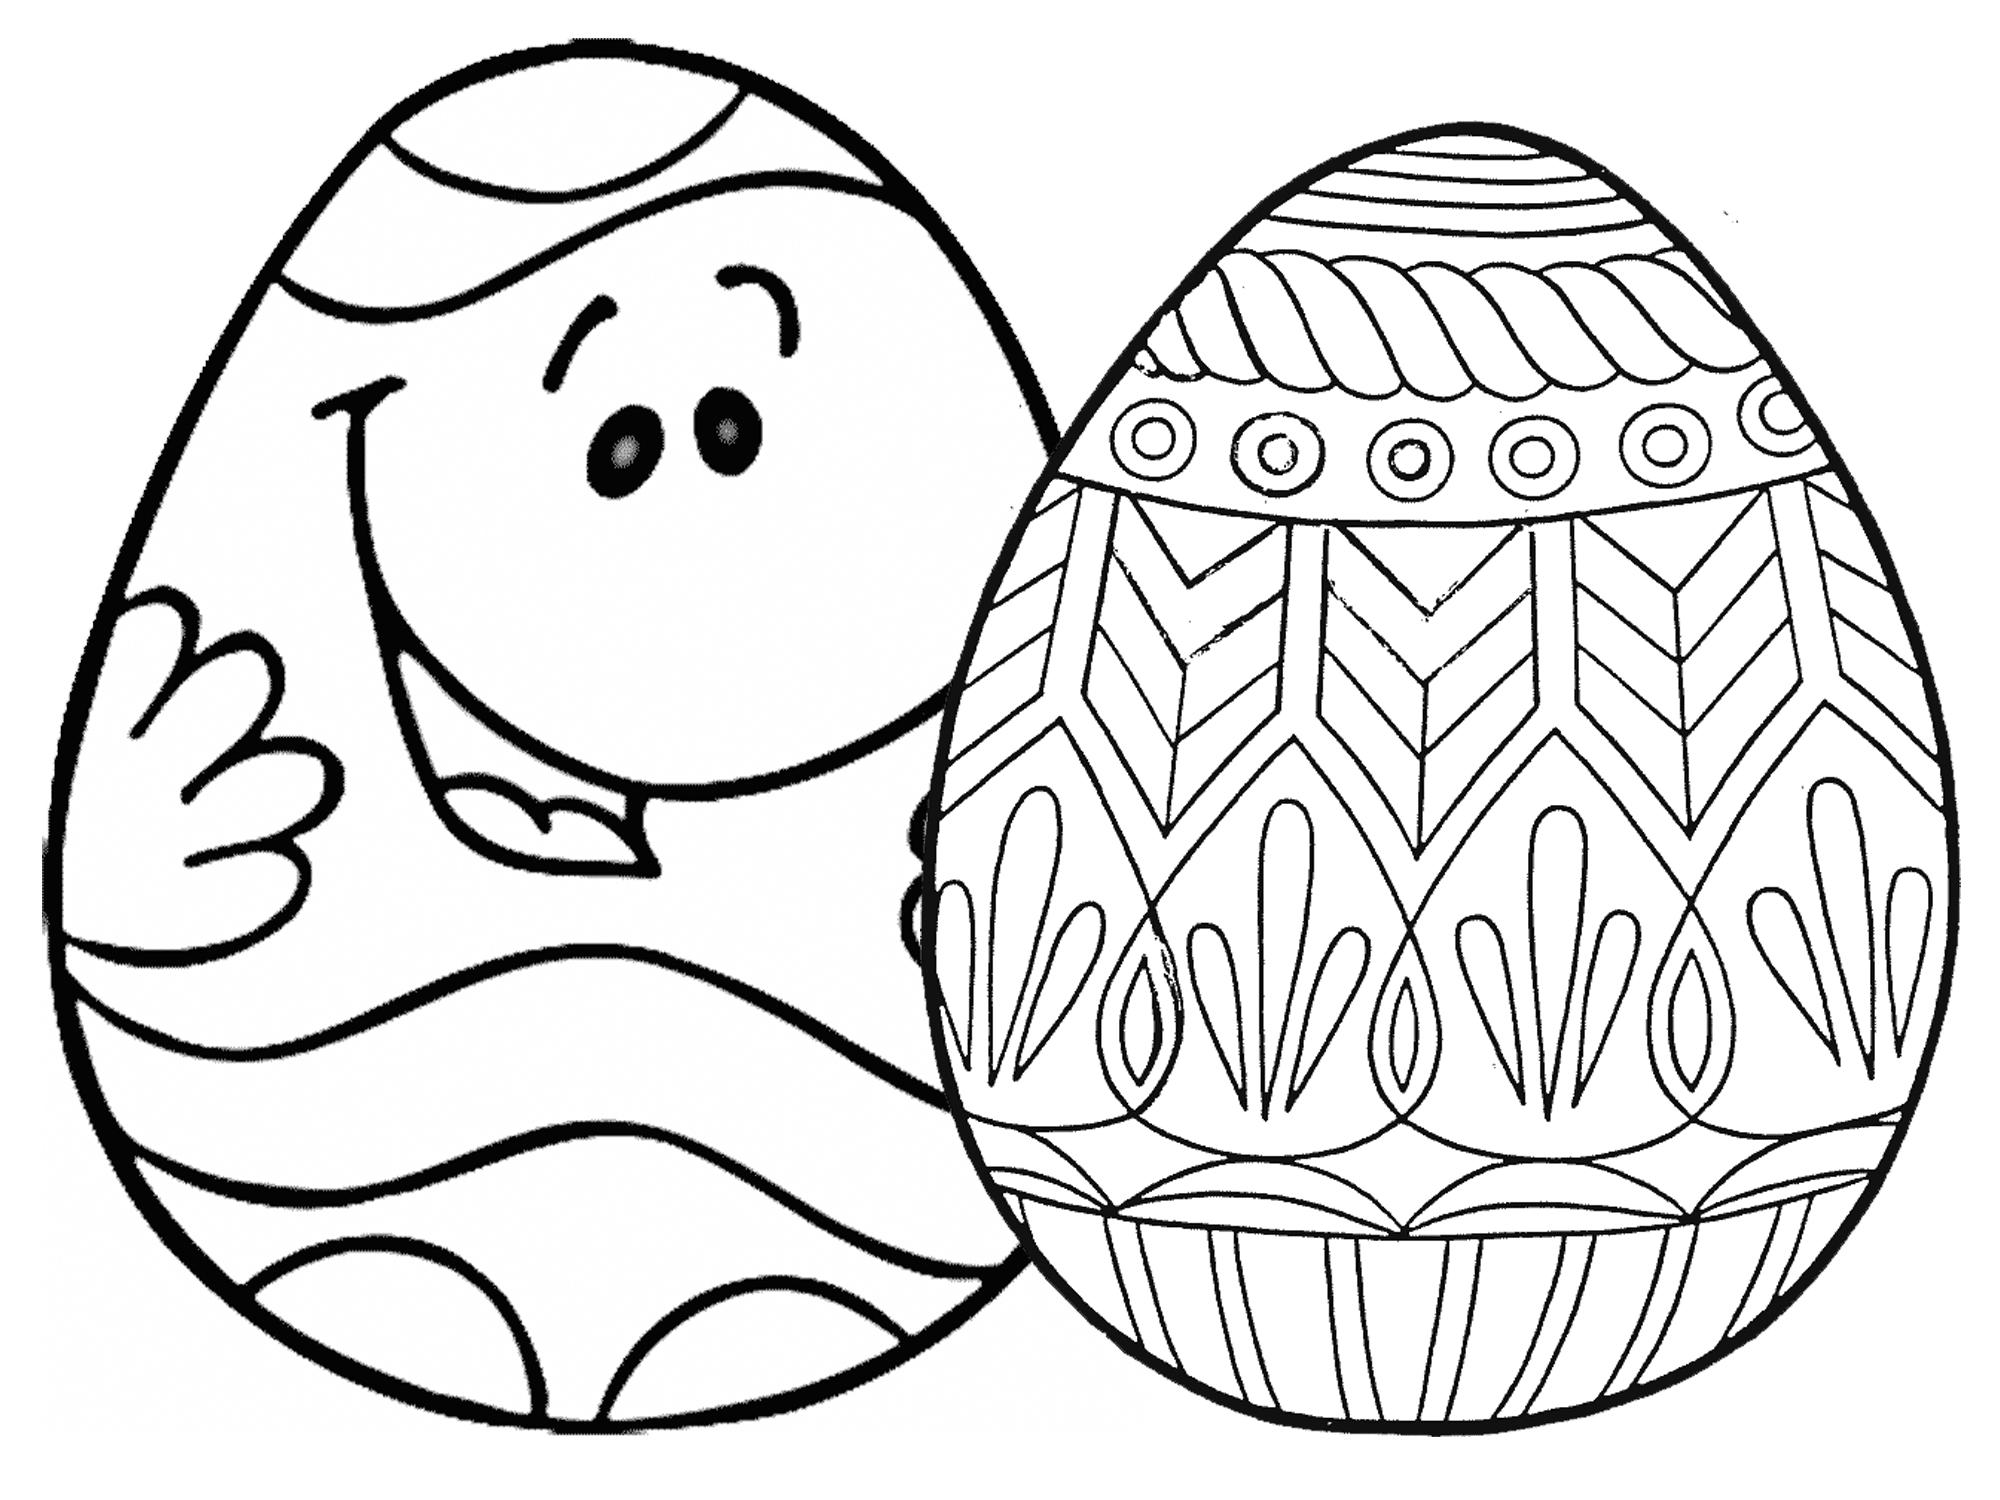 Large Easter Egg Coloring Pages at Free printable